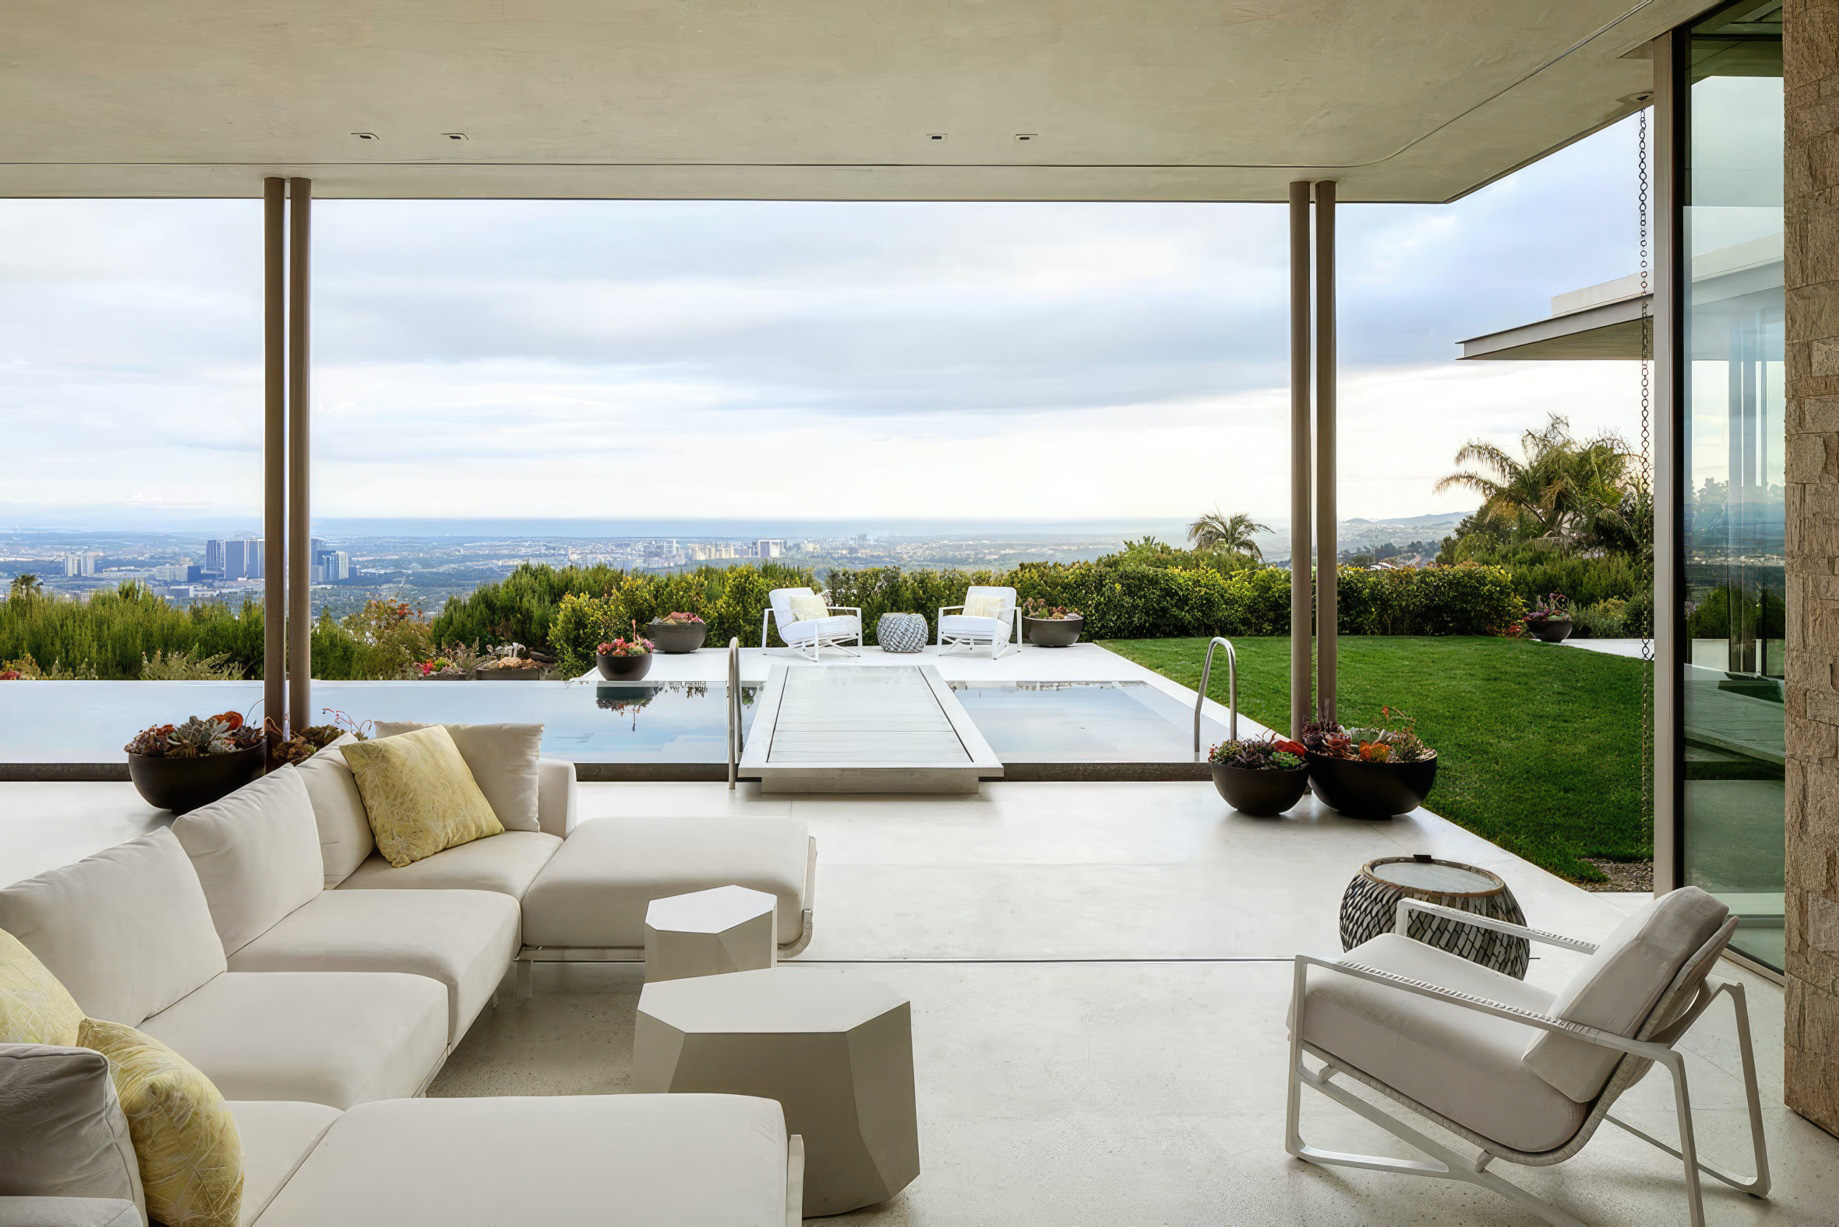 Lori Kanter Tritsch and William P. Lauder’s Trousdale Estates Home – Beverly Hills, CA, USA – 13